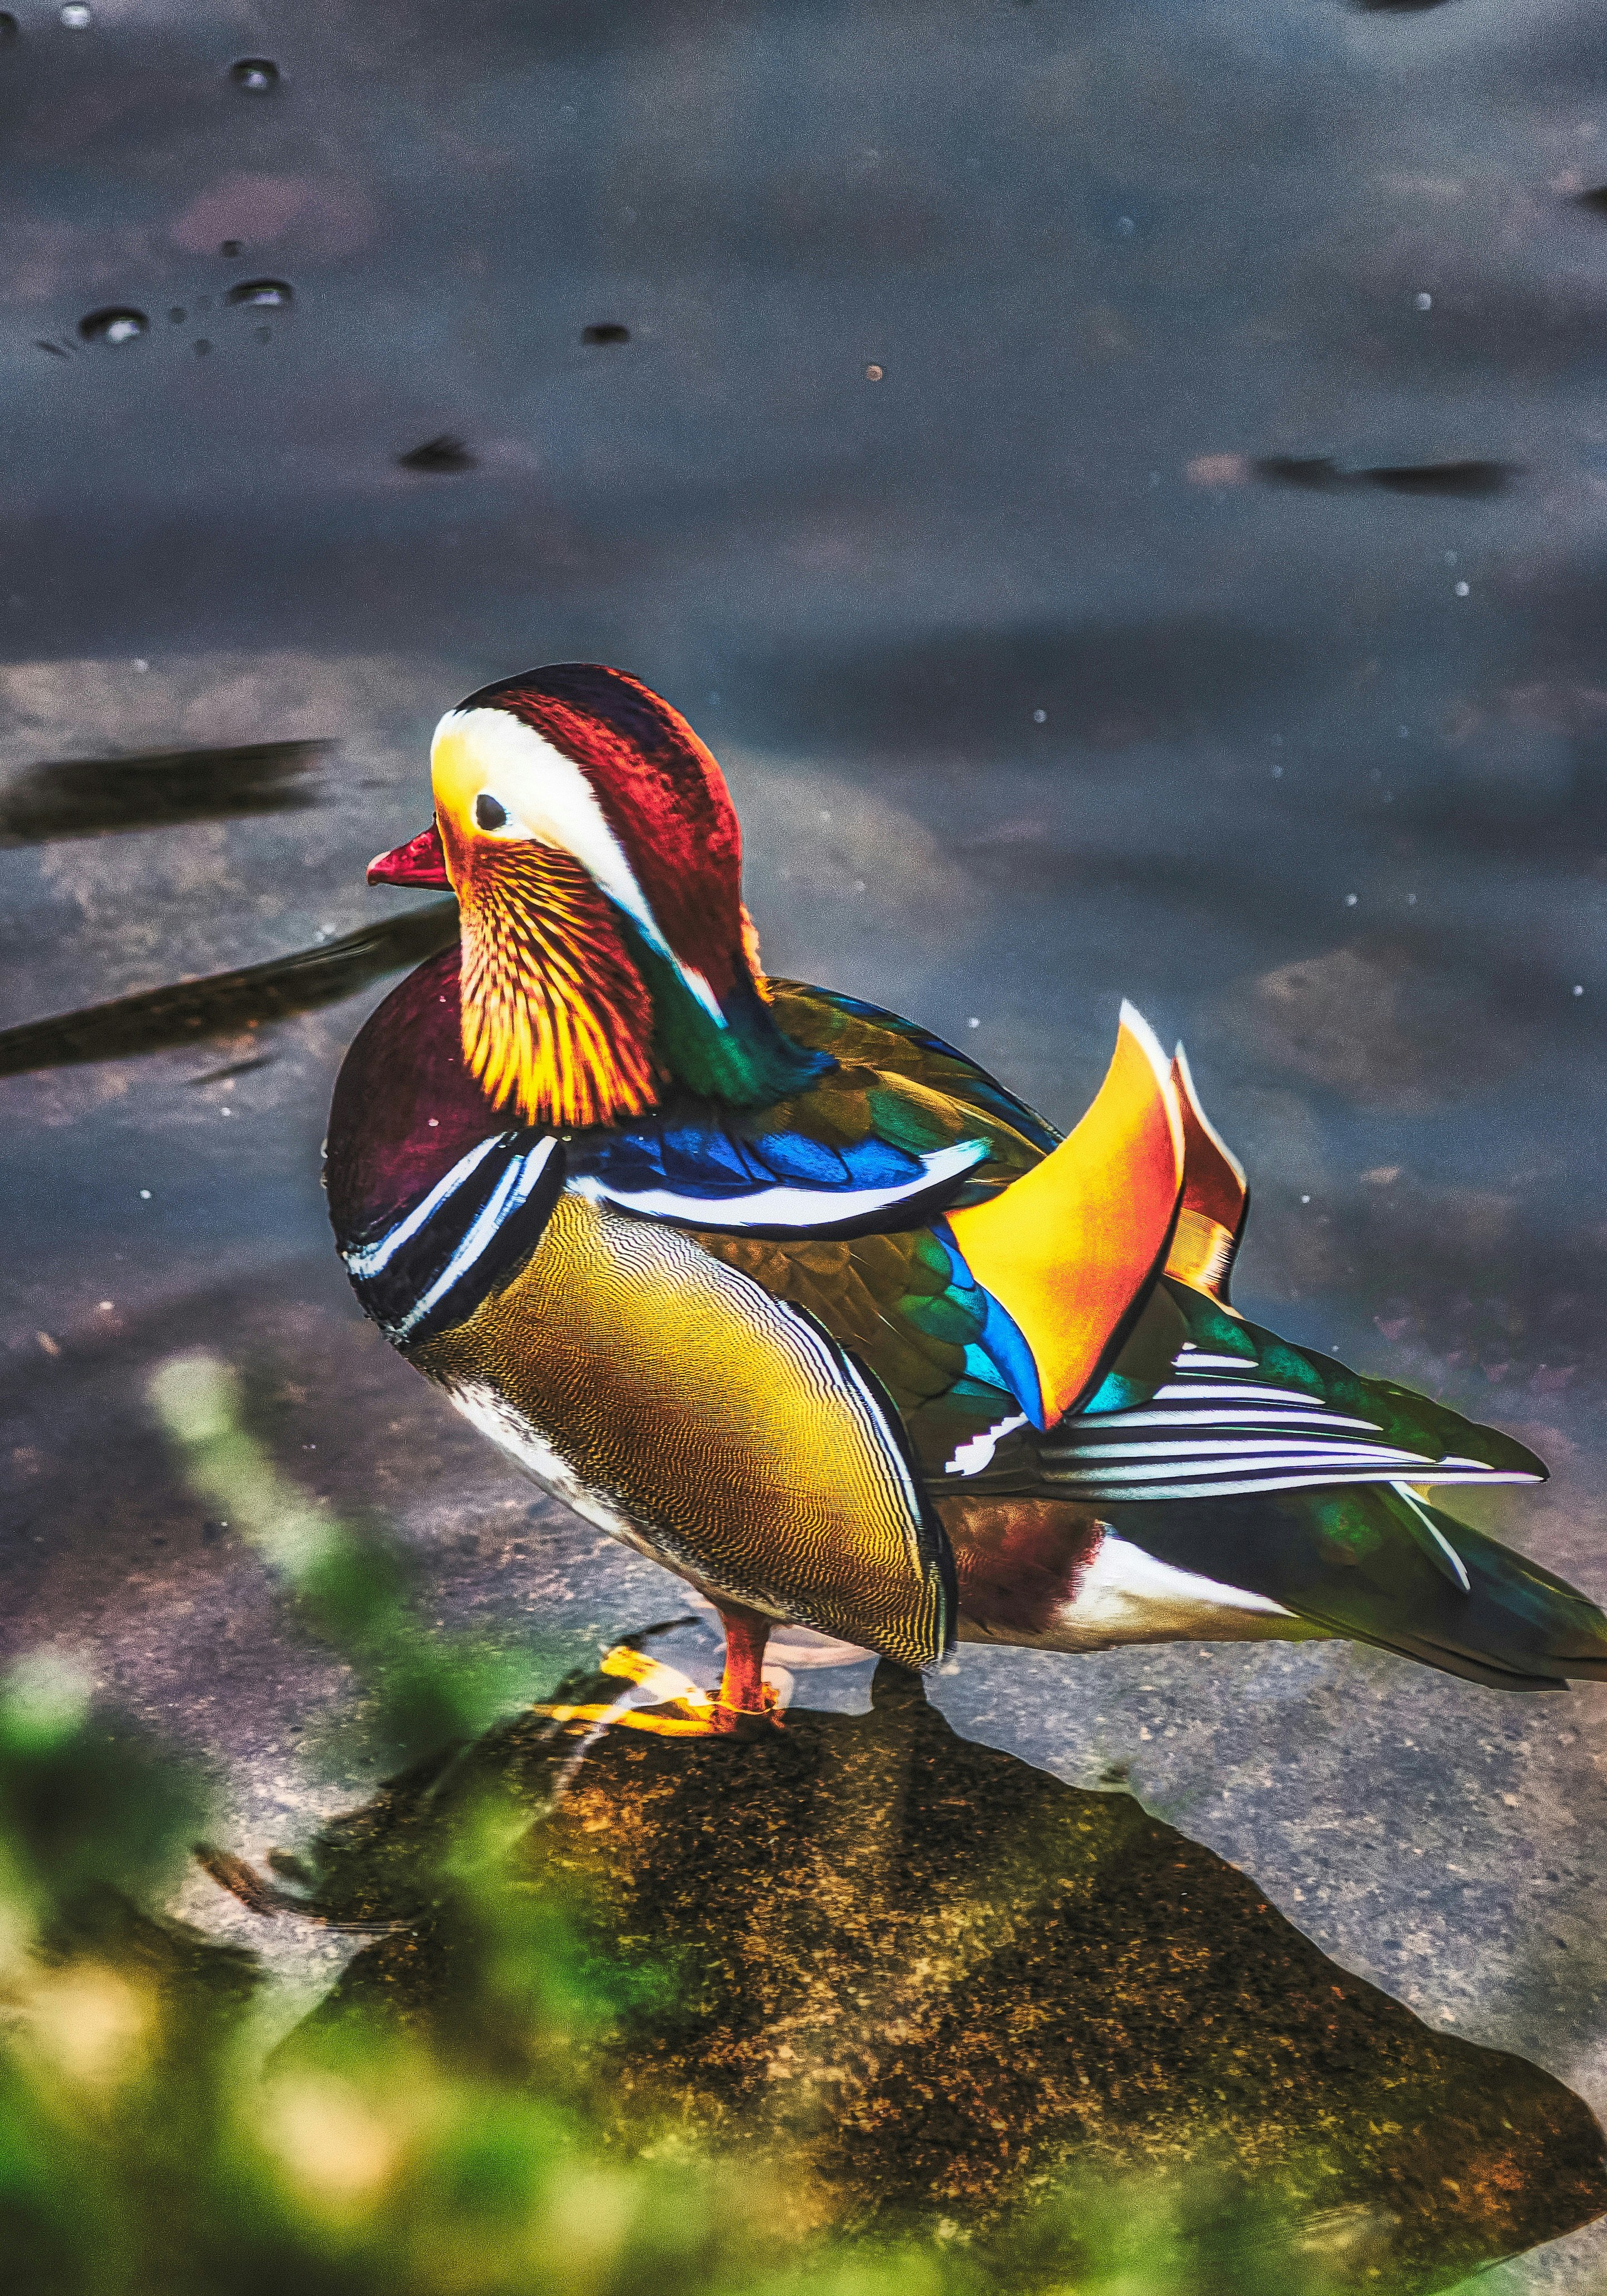 A Mandarin duck (Aix galericulata) at the Silent Valley Forest Park and Reservoir in County Down (Sep., 2020).